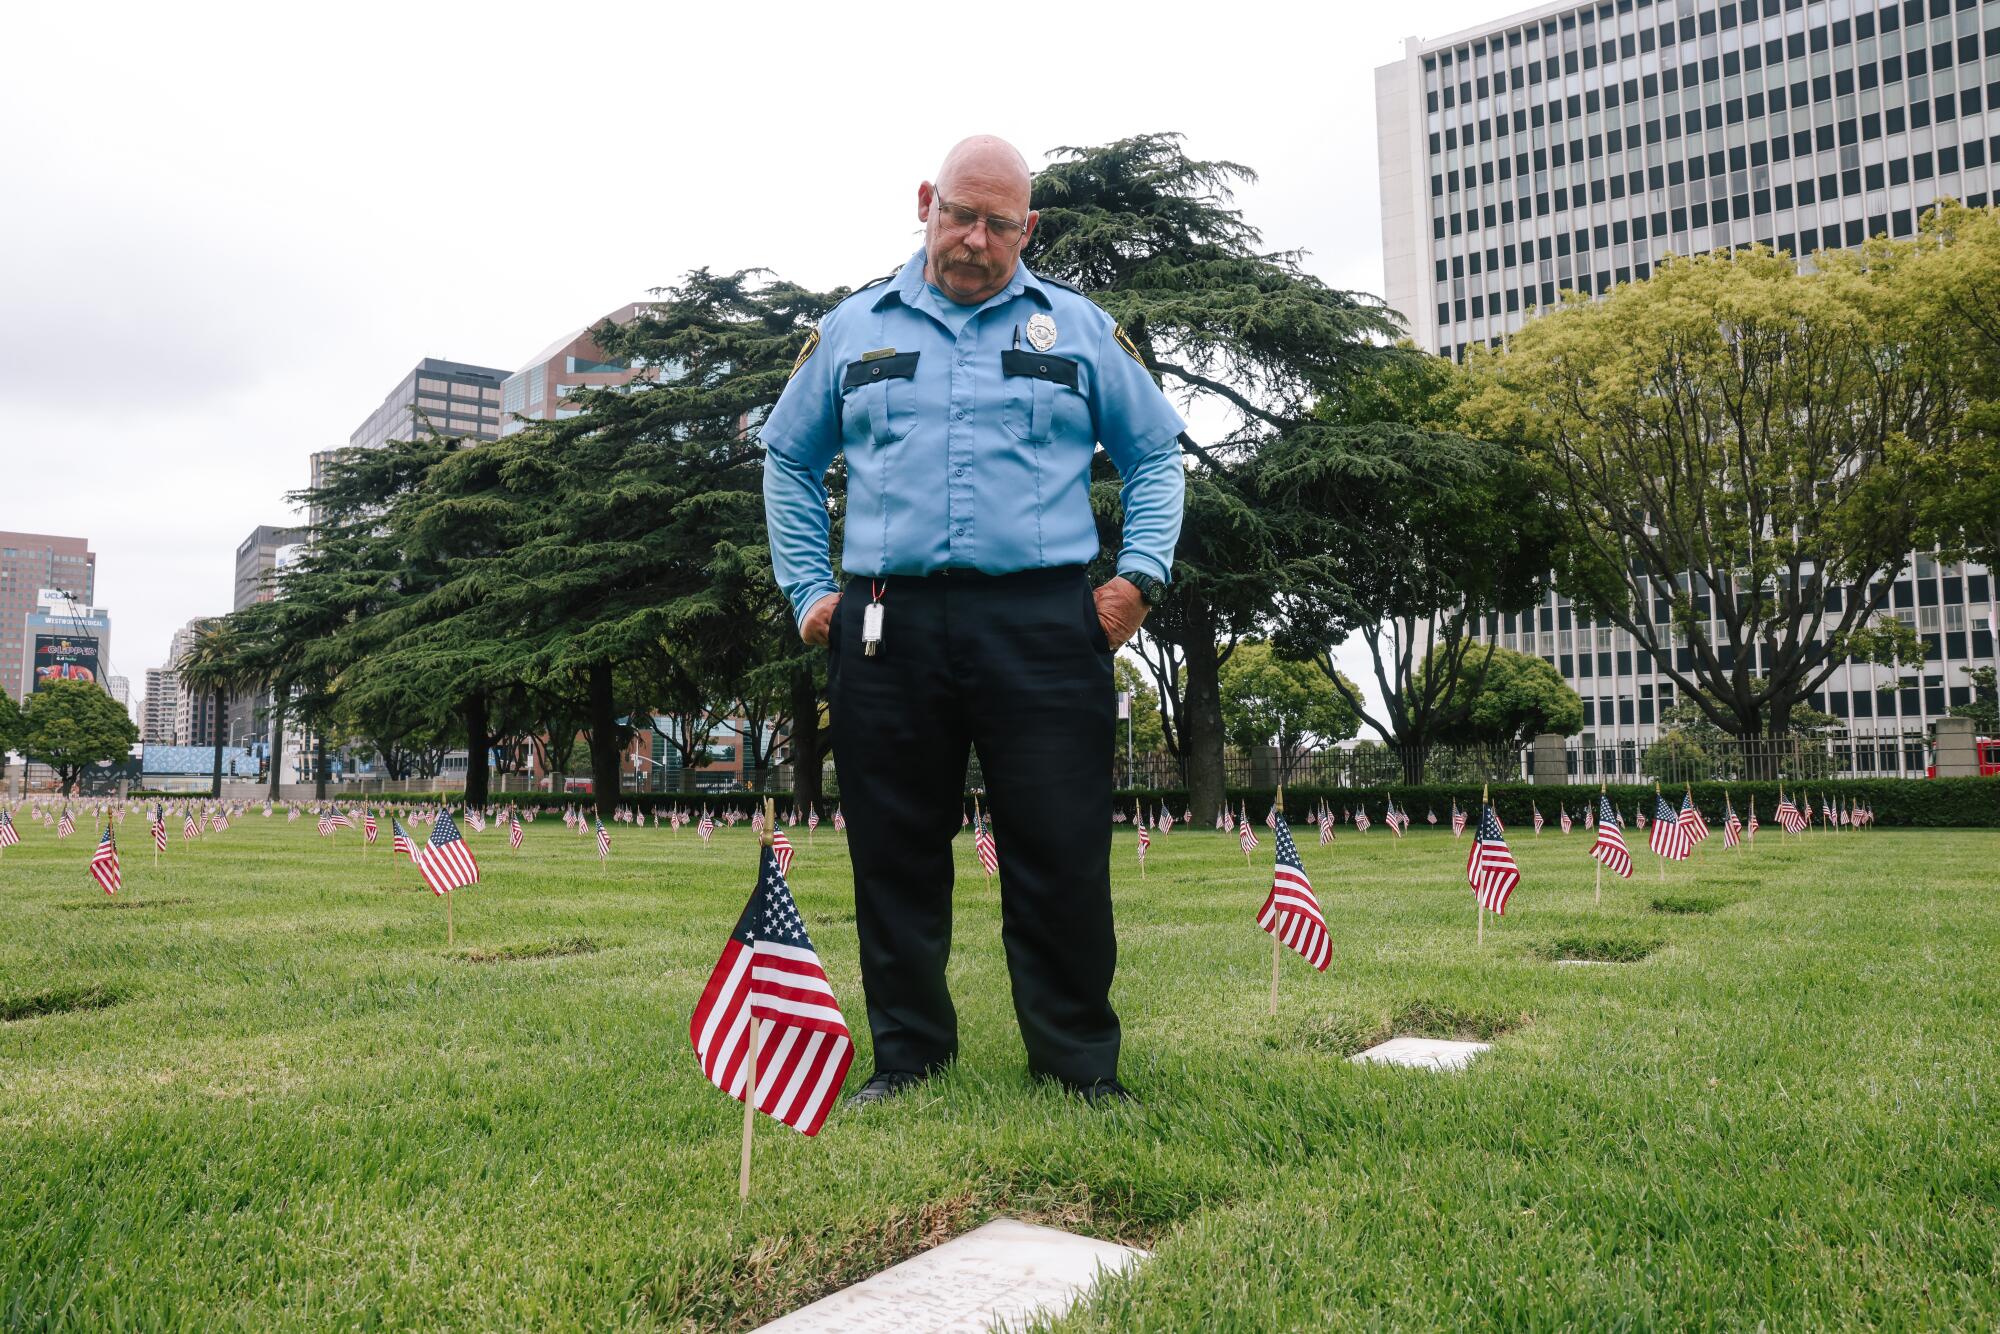 Scott Sargent, who works as security, looks down towards his family member, Lewis L. Owens's gravesite.